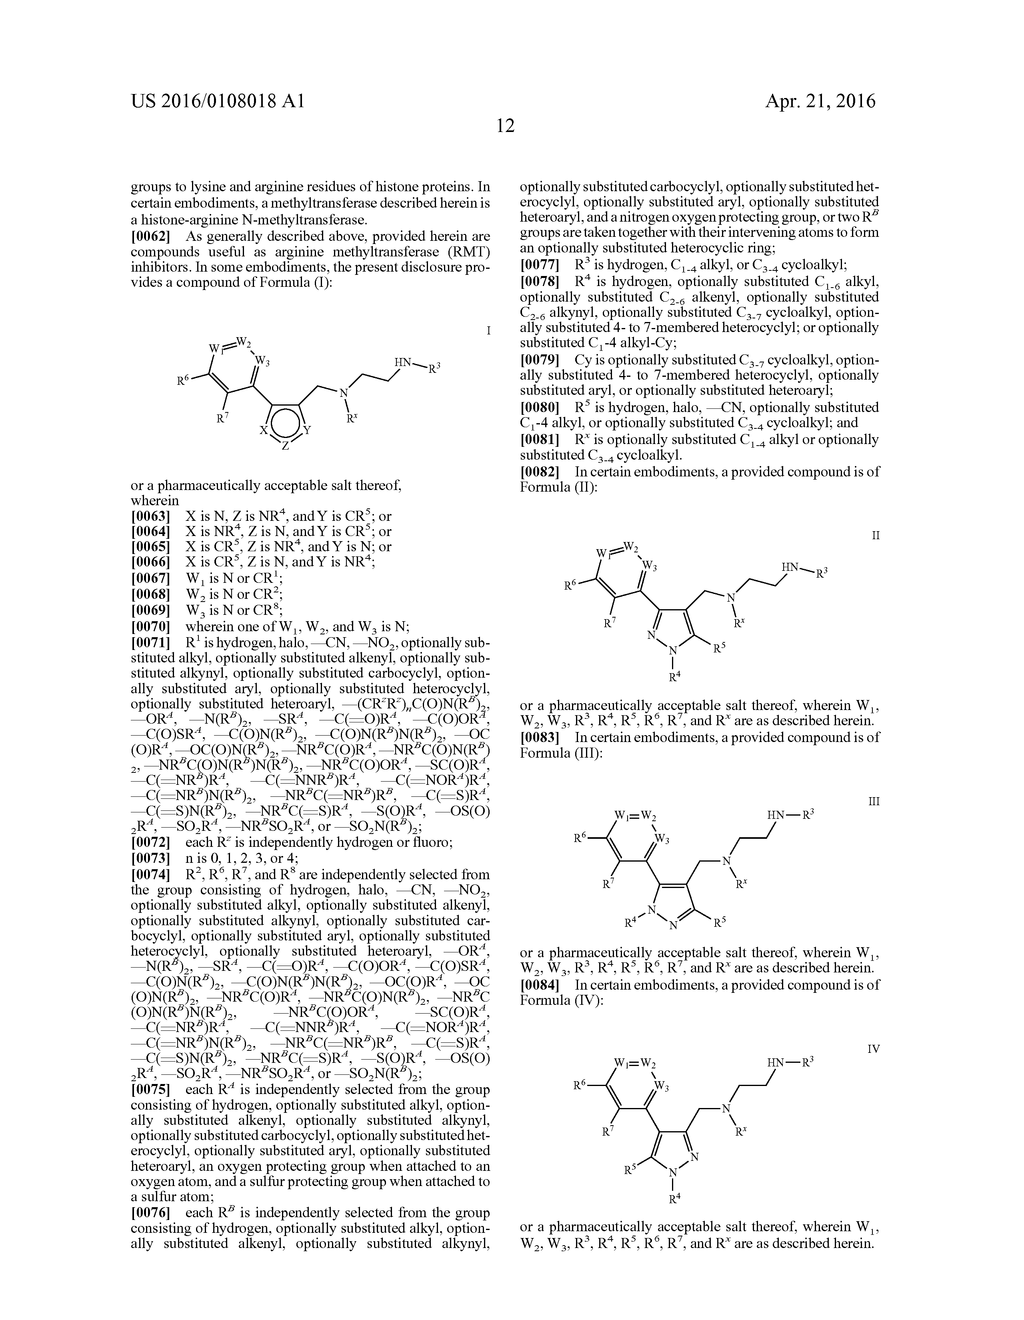 ARGININE METHYLTRANSFERASE INHIBITORS AND USES THEREOF - diagram, schematic, and image 13